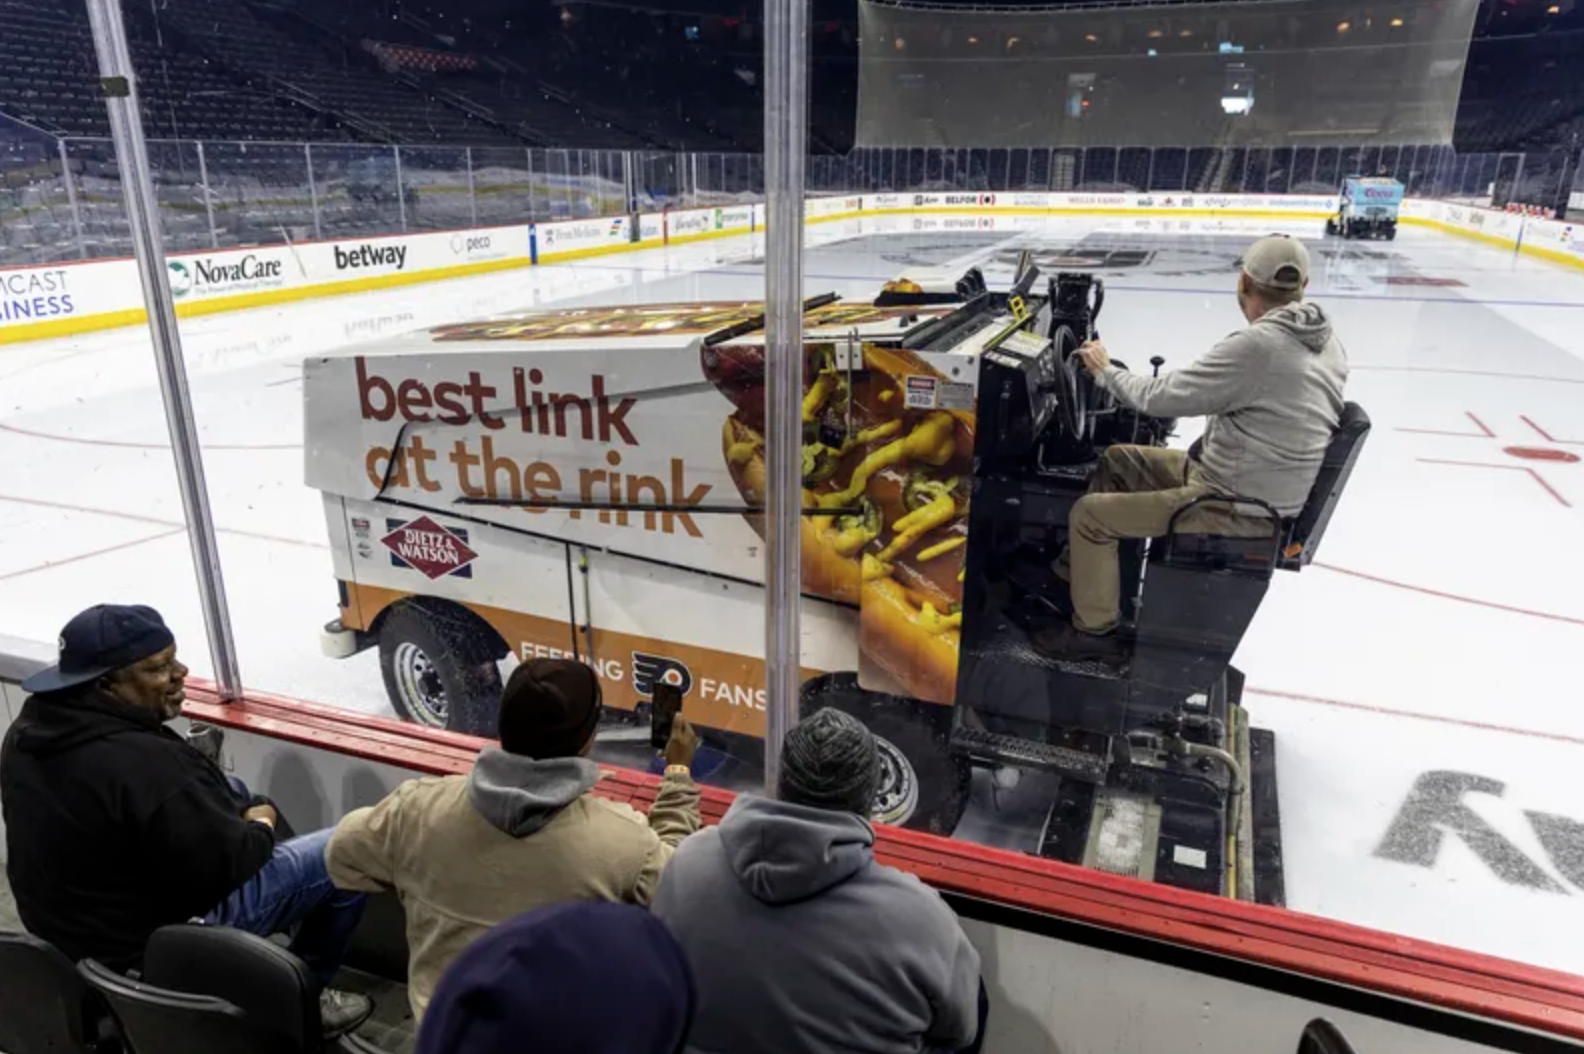 Philly Ice Rink Managers Get a Zamboni Master Class from the Flyers’ Operators